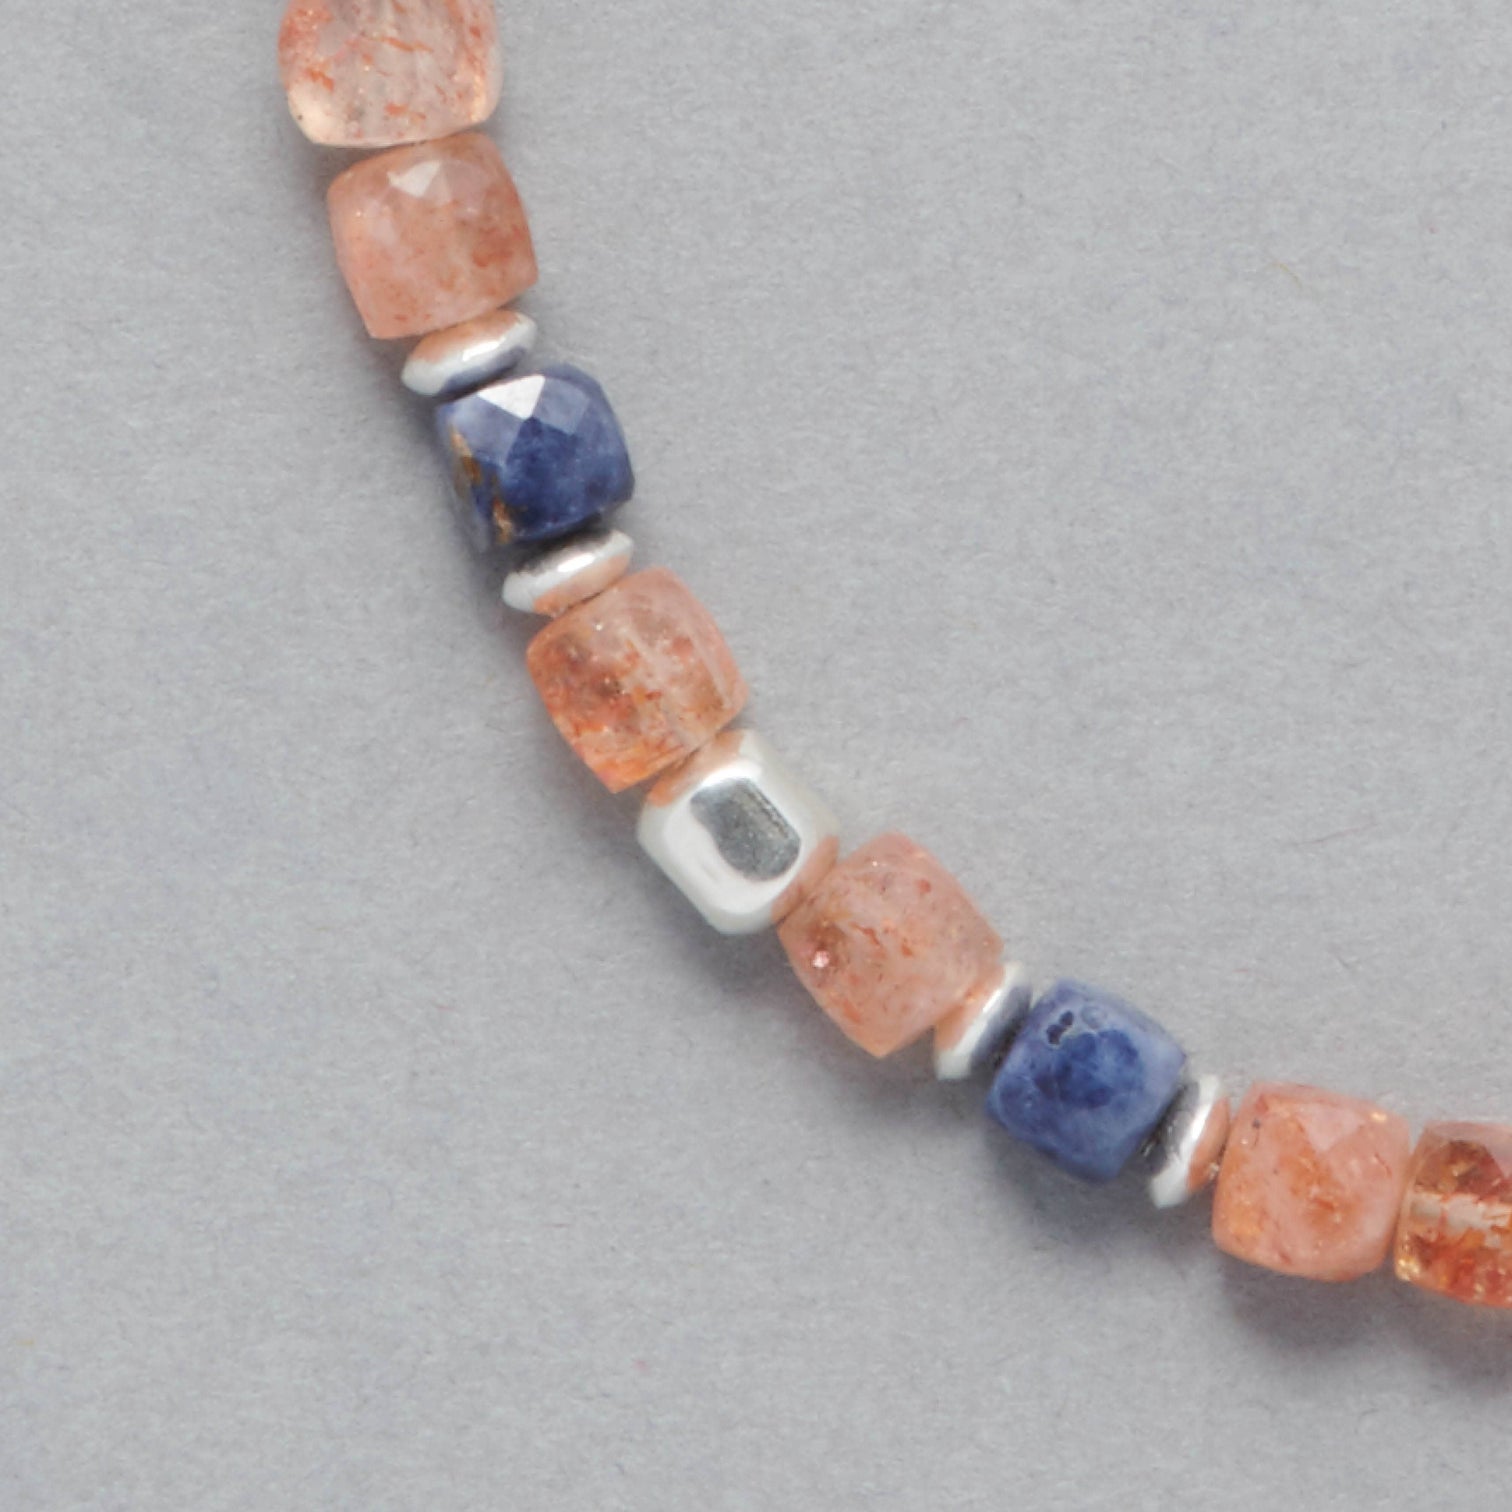 Detail shot of the Ginger Necklace made with faceted square Sunstones, faceted square Sapphires and Sterling Silver elements. 